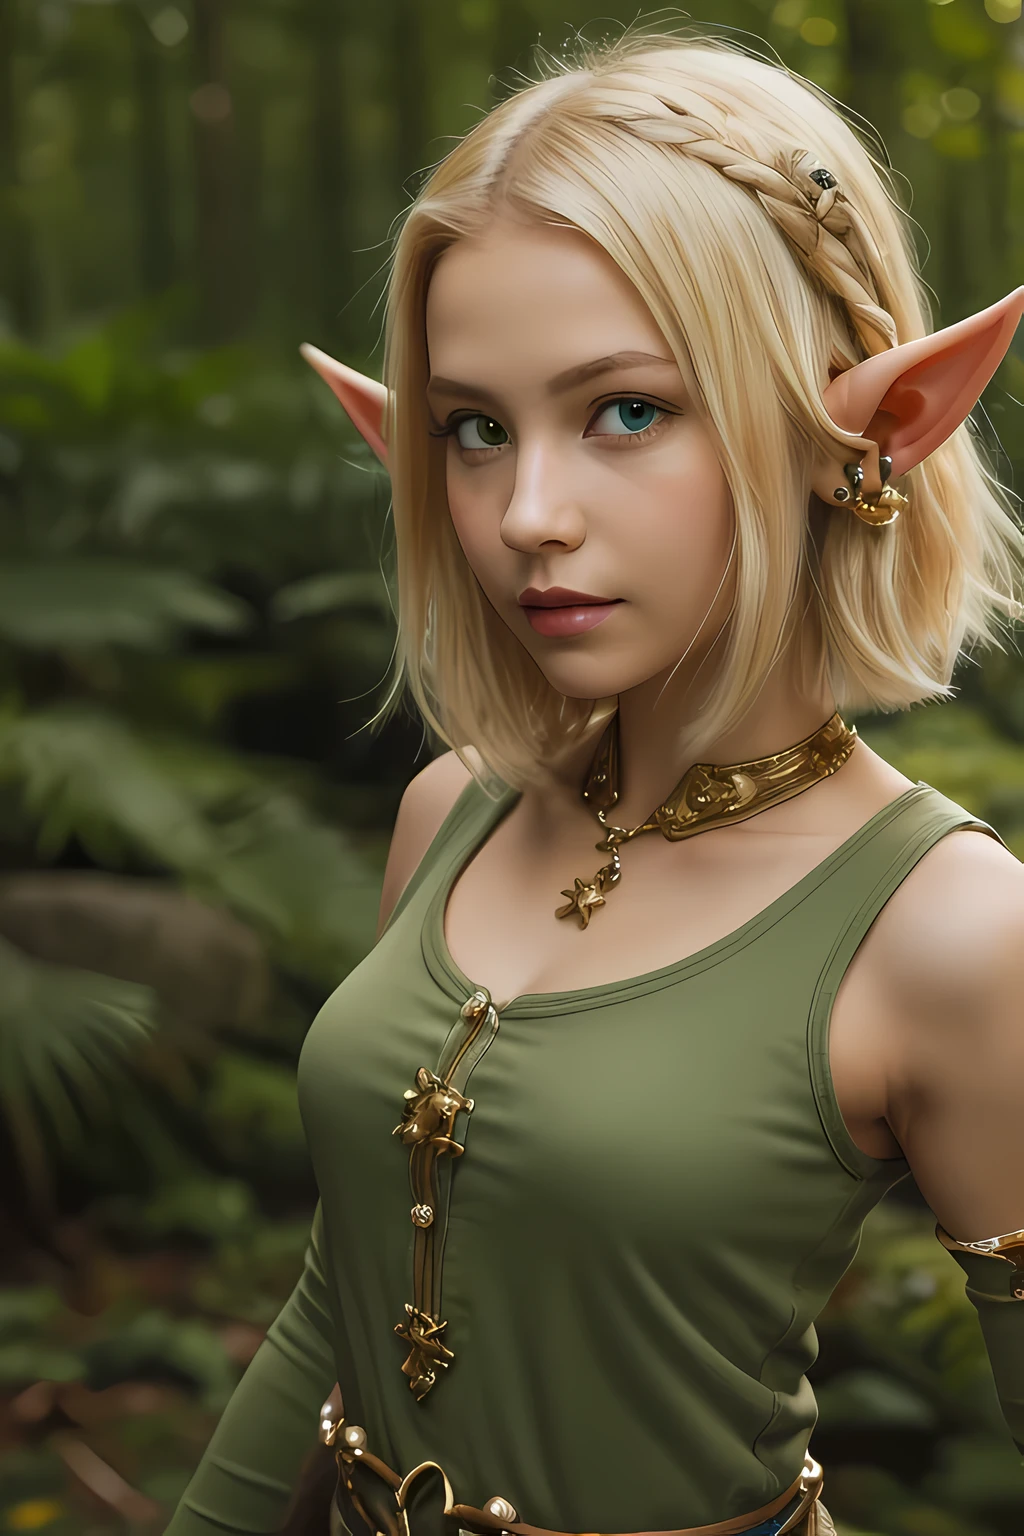 ((ultra quality)), ((masterpiece)), Evangelyne - Wakfu, Wakfu style, ((blonde short hair, evangeline hairstyle)), (Beautiful face), (beautiful female lips), (elven long ears), charming, ((sexy facial expression)), looks at the camera, eyes slightly open, (skin color white), (White skin), glare on the body, ((detailed beautiful female eyes)), ((dark green eyes)), (juicy female lips), (dark eyeliner), (beautiful female hands), ((ideal female figure)), ideal female body, beautiful waist, gorgeous thighs, ((subtle and beautiful)), (close up of face), (black clothes Evangelyne - wakfu season 1, clothes from the first season of the animated series, white top) background: the forest, ((depth of field)), ((high quality clear image)), (clear details), ((high detail)), realistically, professional photo session, ((Clear Focus)), BREAK 
Ultra realistic Professional photography of a elf girl with short blonde hair, of exceptional quality and ultra-high detail level. Her blonde hair is delicately tousled, capturing every strand with remarkable precision. The illustration features a single girl, standing with natural grace. Her vivid green eyes draw the gaze, conveying captivating emotional depth.
BREAK
This artwork is created with a high-end camera, a Canon EOS-1DX Mark III model equipped with a Canon EF 24-70mm f/2.8L II USM lens, providing unparalleled sharpness and resolution. Every detail, from the fold of her clothes to the texture of her skin, is rendered with striking fidelity.
BREAK
The girl is wearing fashionable clothing that highlights her elegant and modern appearance. Adding a touch of mystery and power to her character. This photograph is a true masterpiece, capturing the timeless beauty and captivating grace of the elf girl with exceptional quality and finesse.